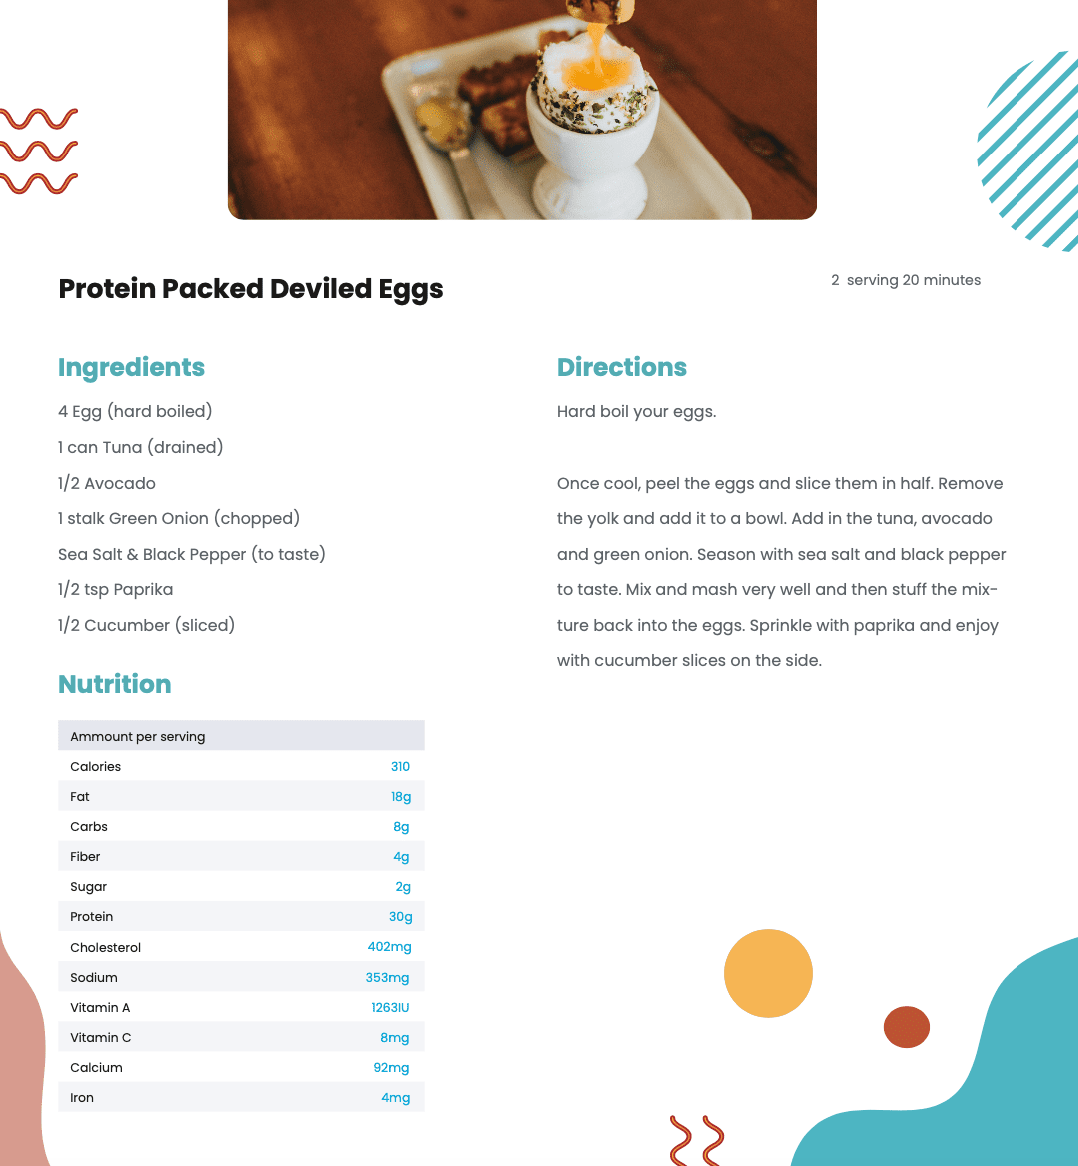 RECIPE: PROTEIN PACKED DEVILED EGGS